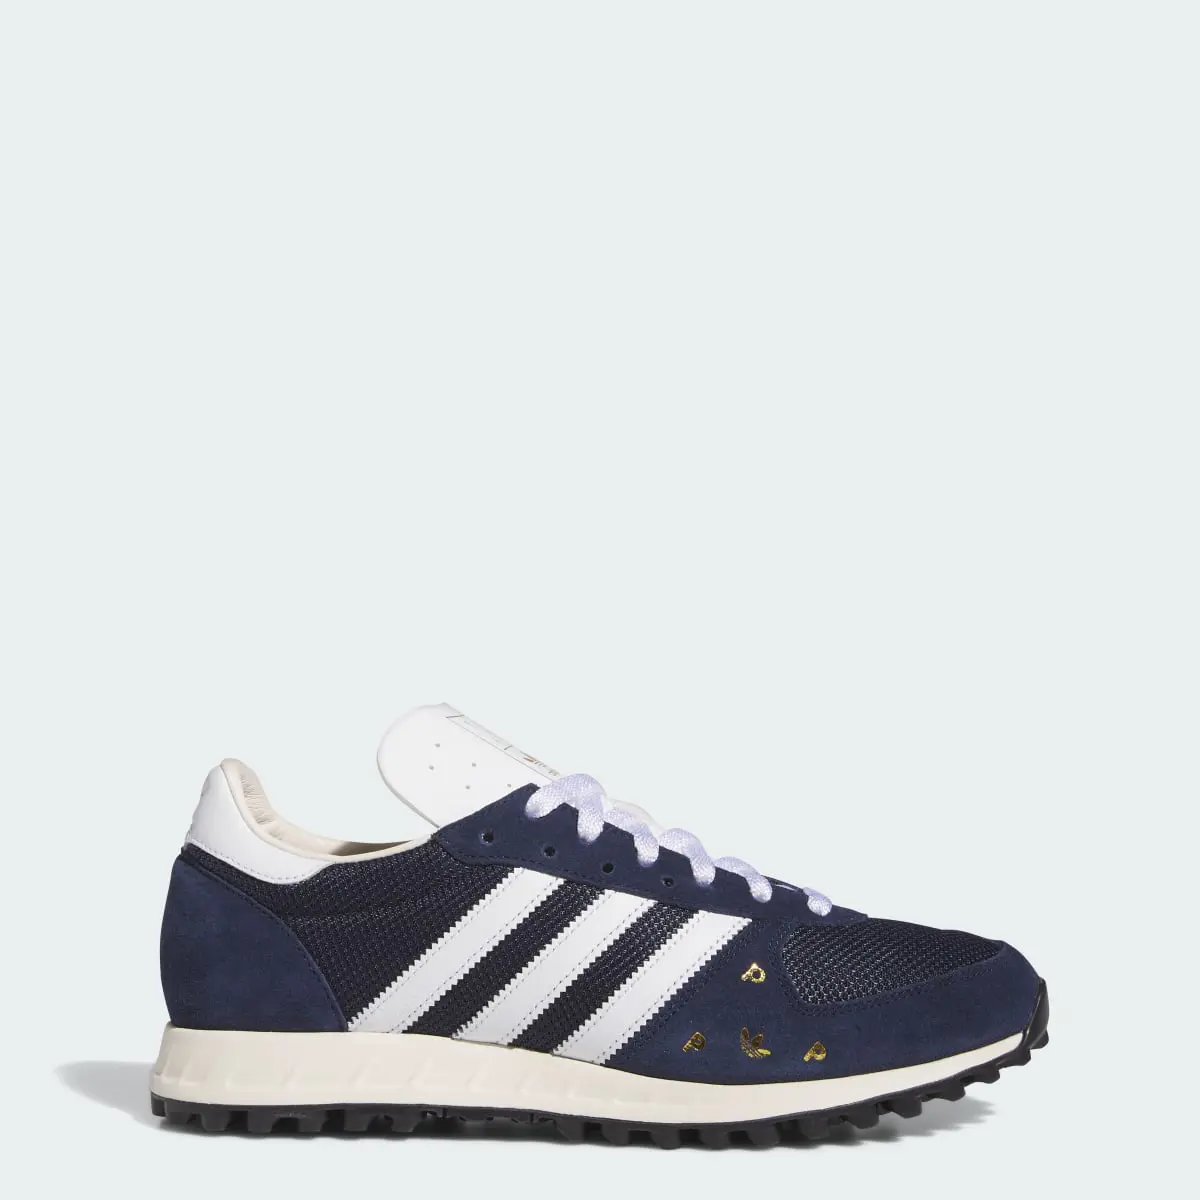 Adidas Pop Trading Co TRX Trainers. 1